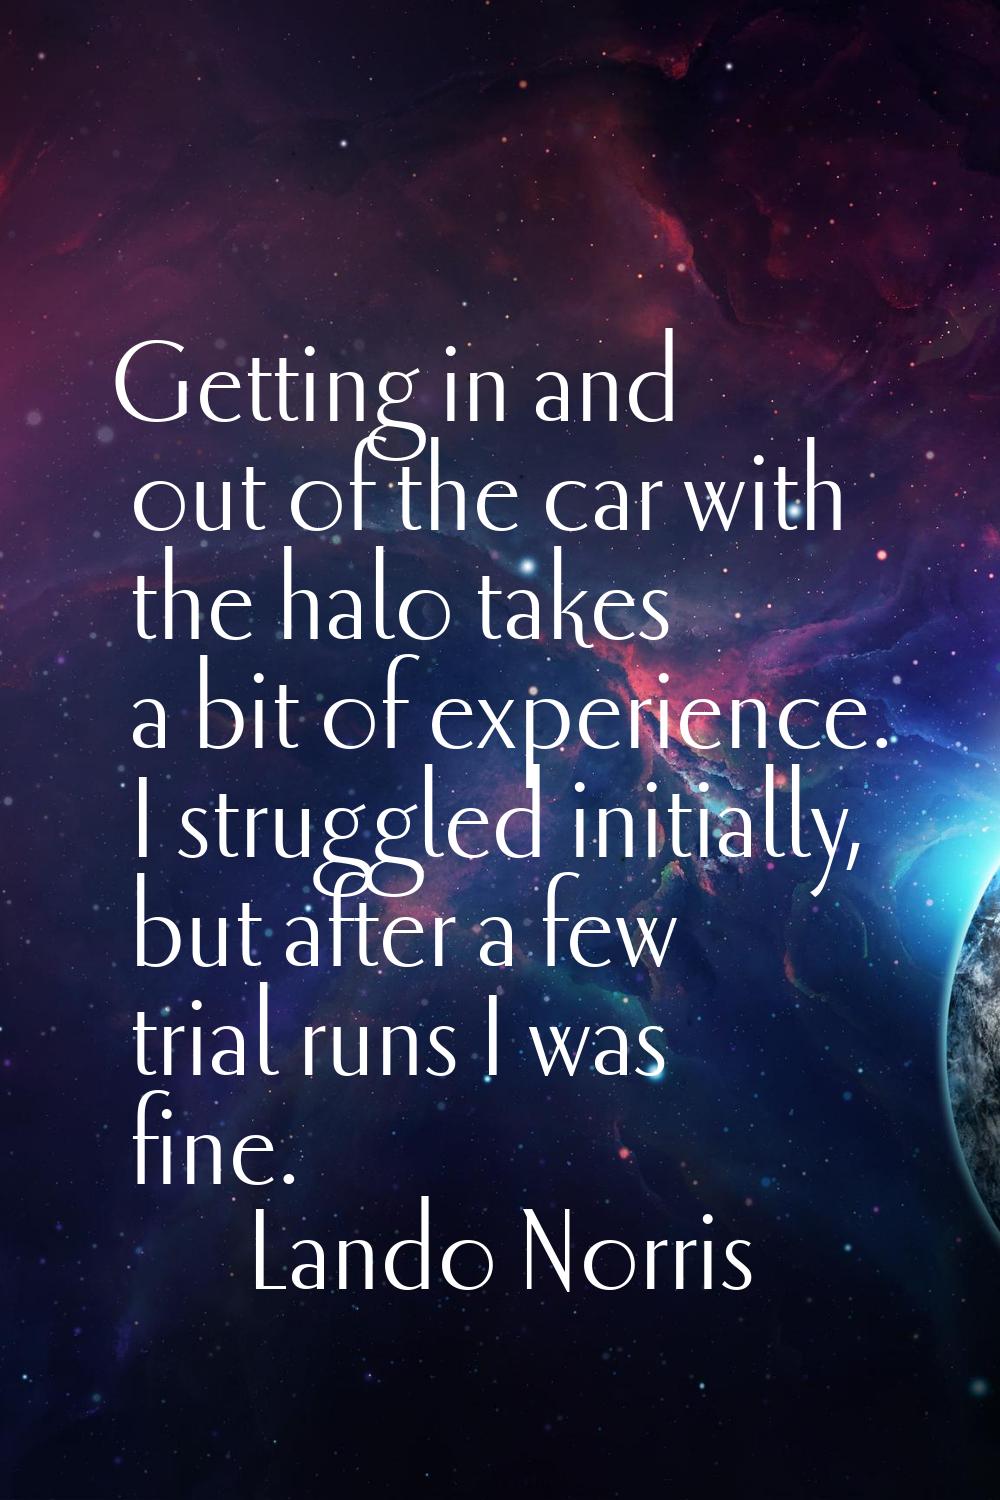 Getting in and out of the car with the halo takes a bit of experience. I struggled initially, but a